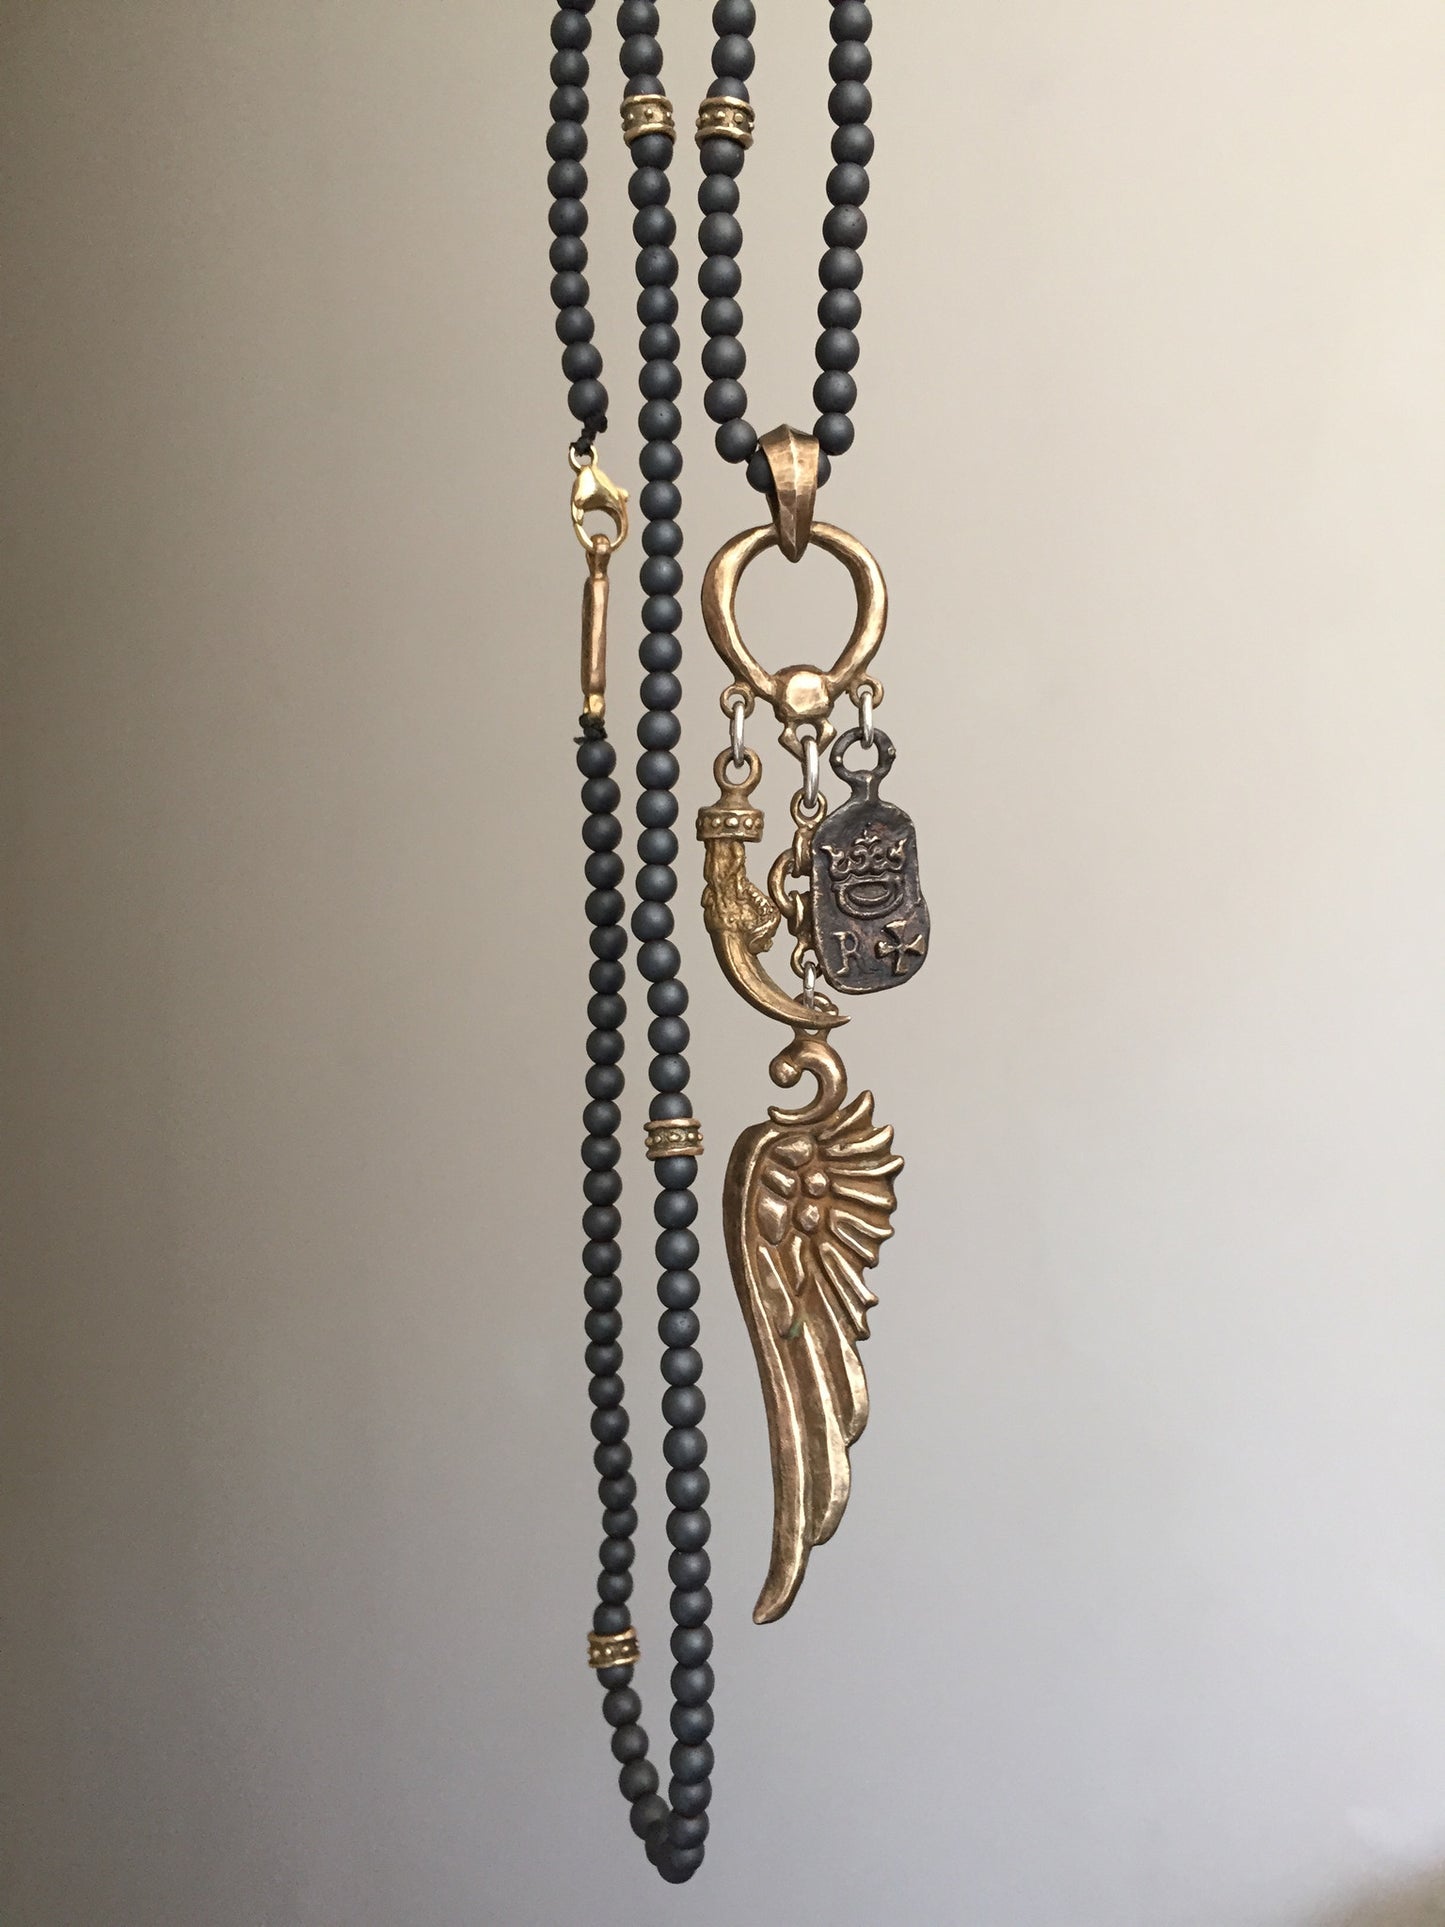 Wing, Clew and Emblem Bronze Art Necklace with Hematite Beads